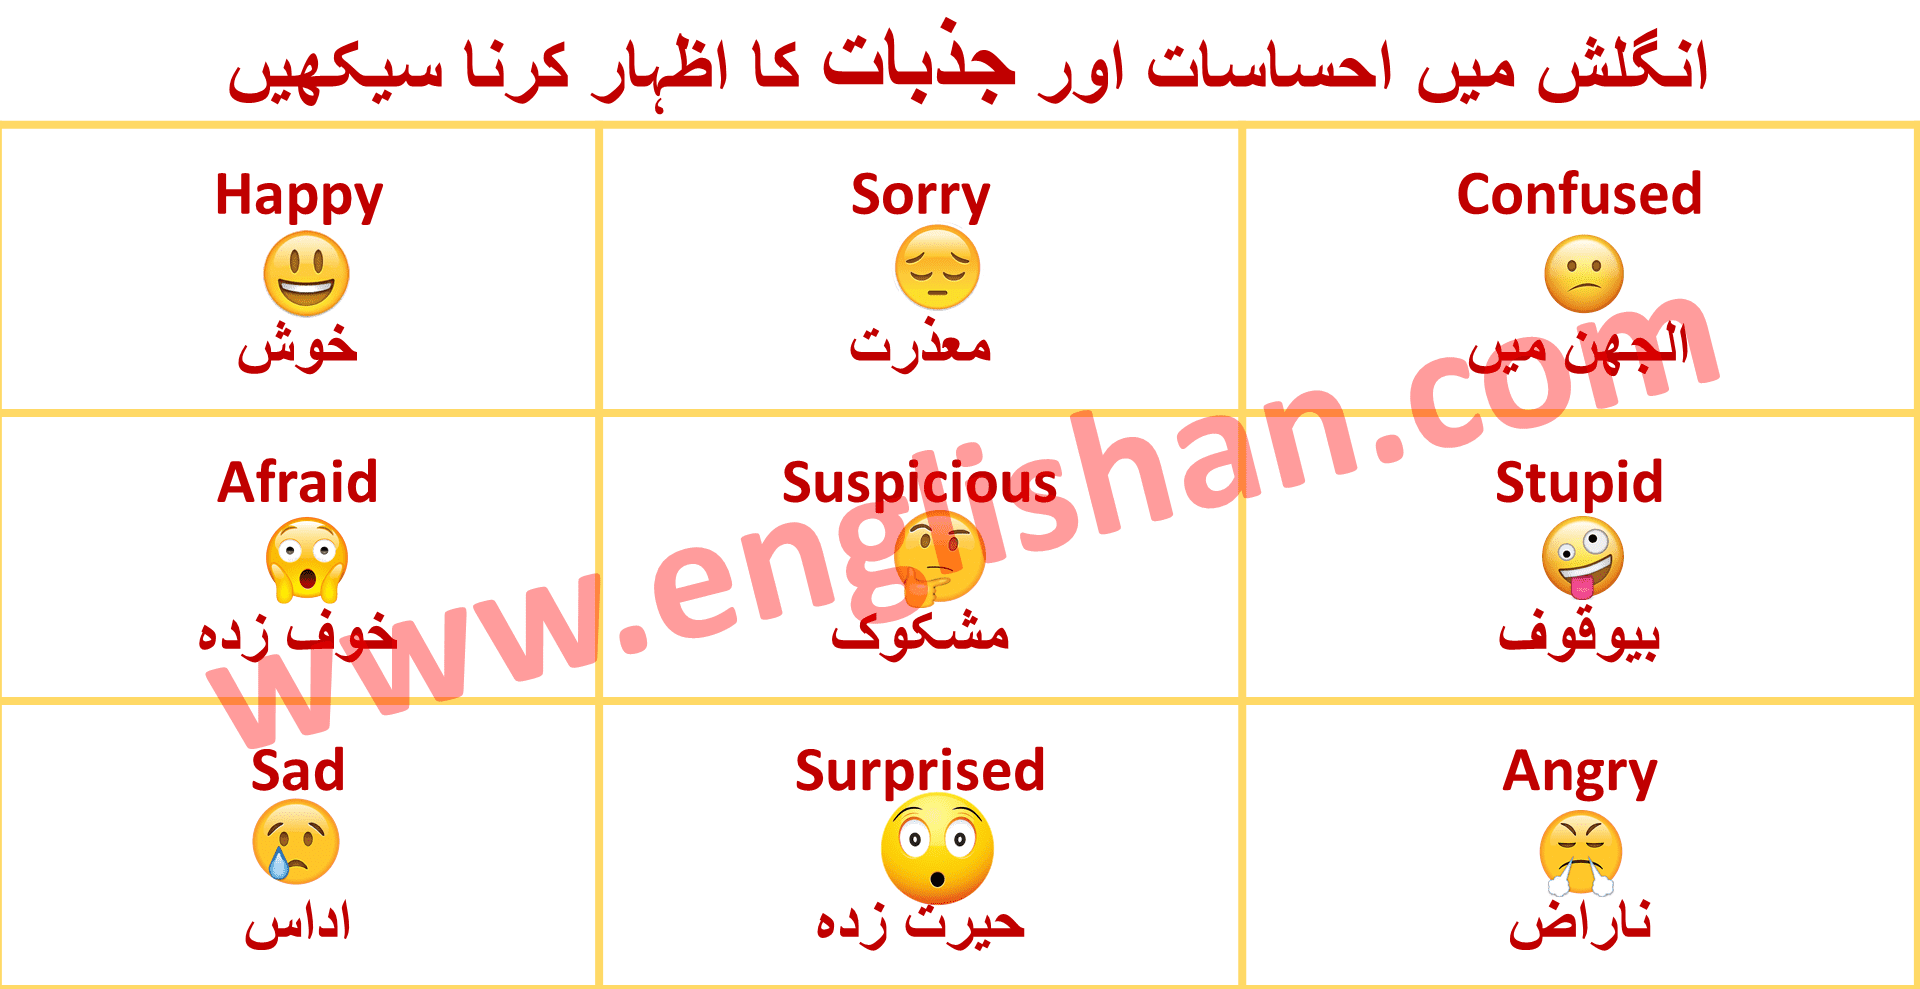 Feelings & Emotions Vocabulary List with Urdu Meanings